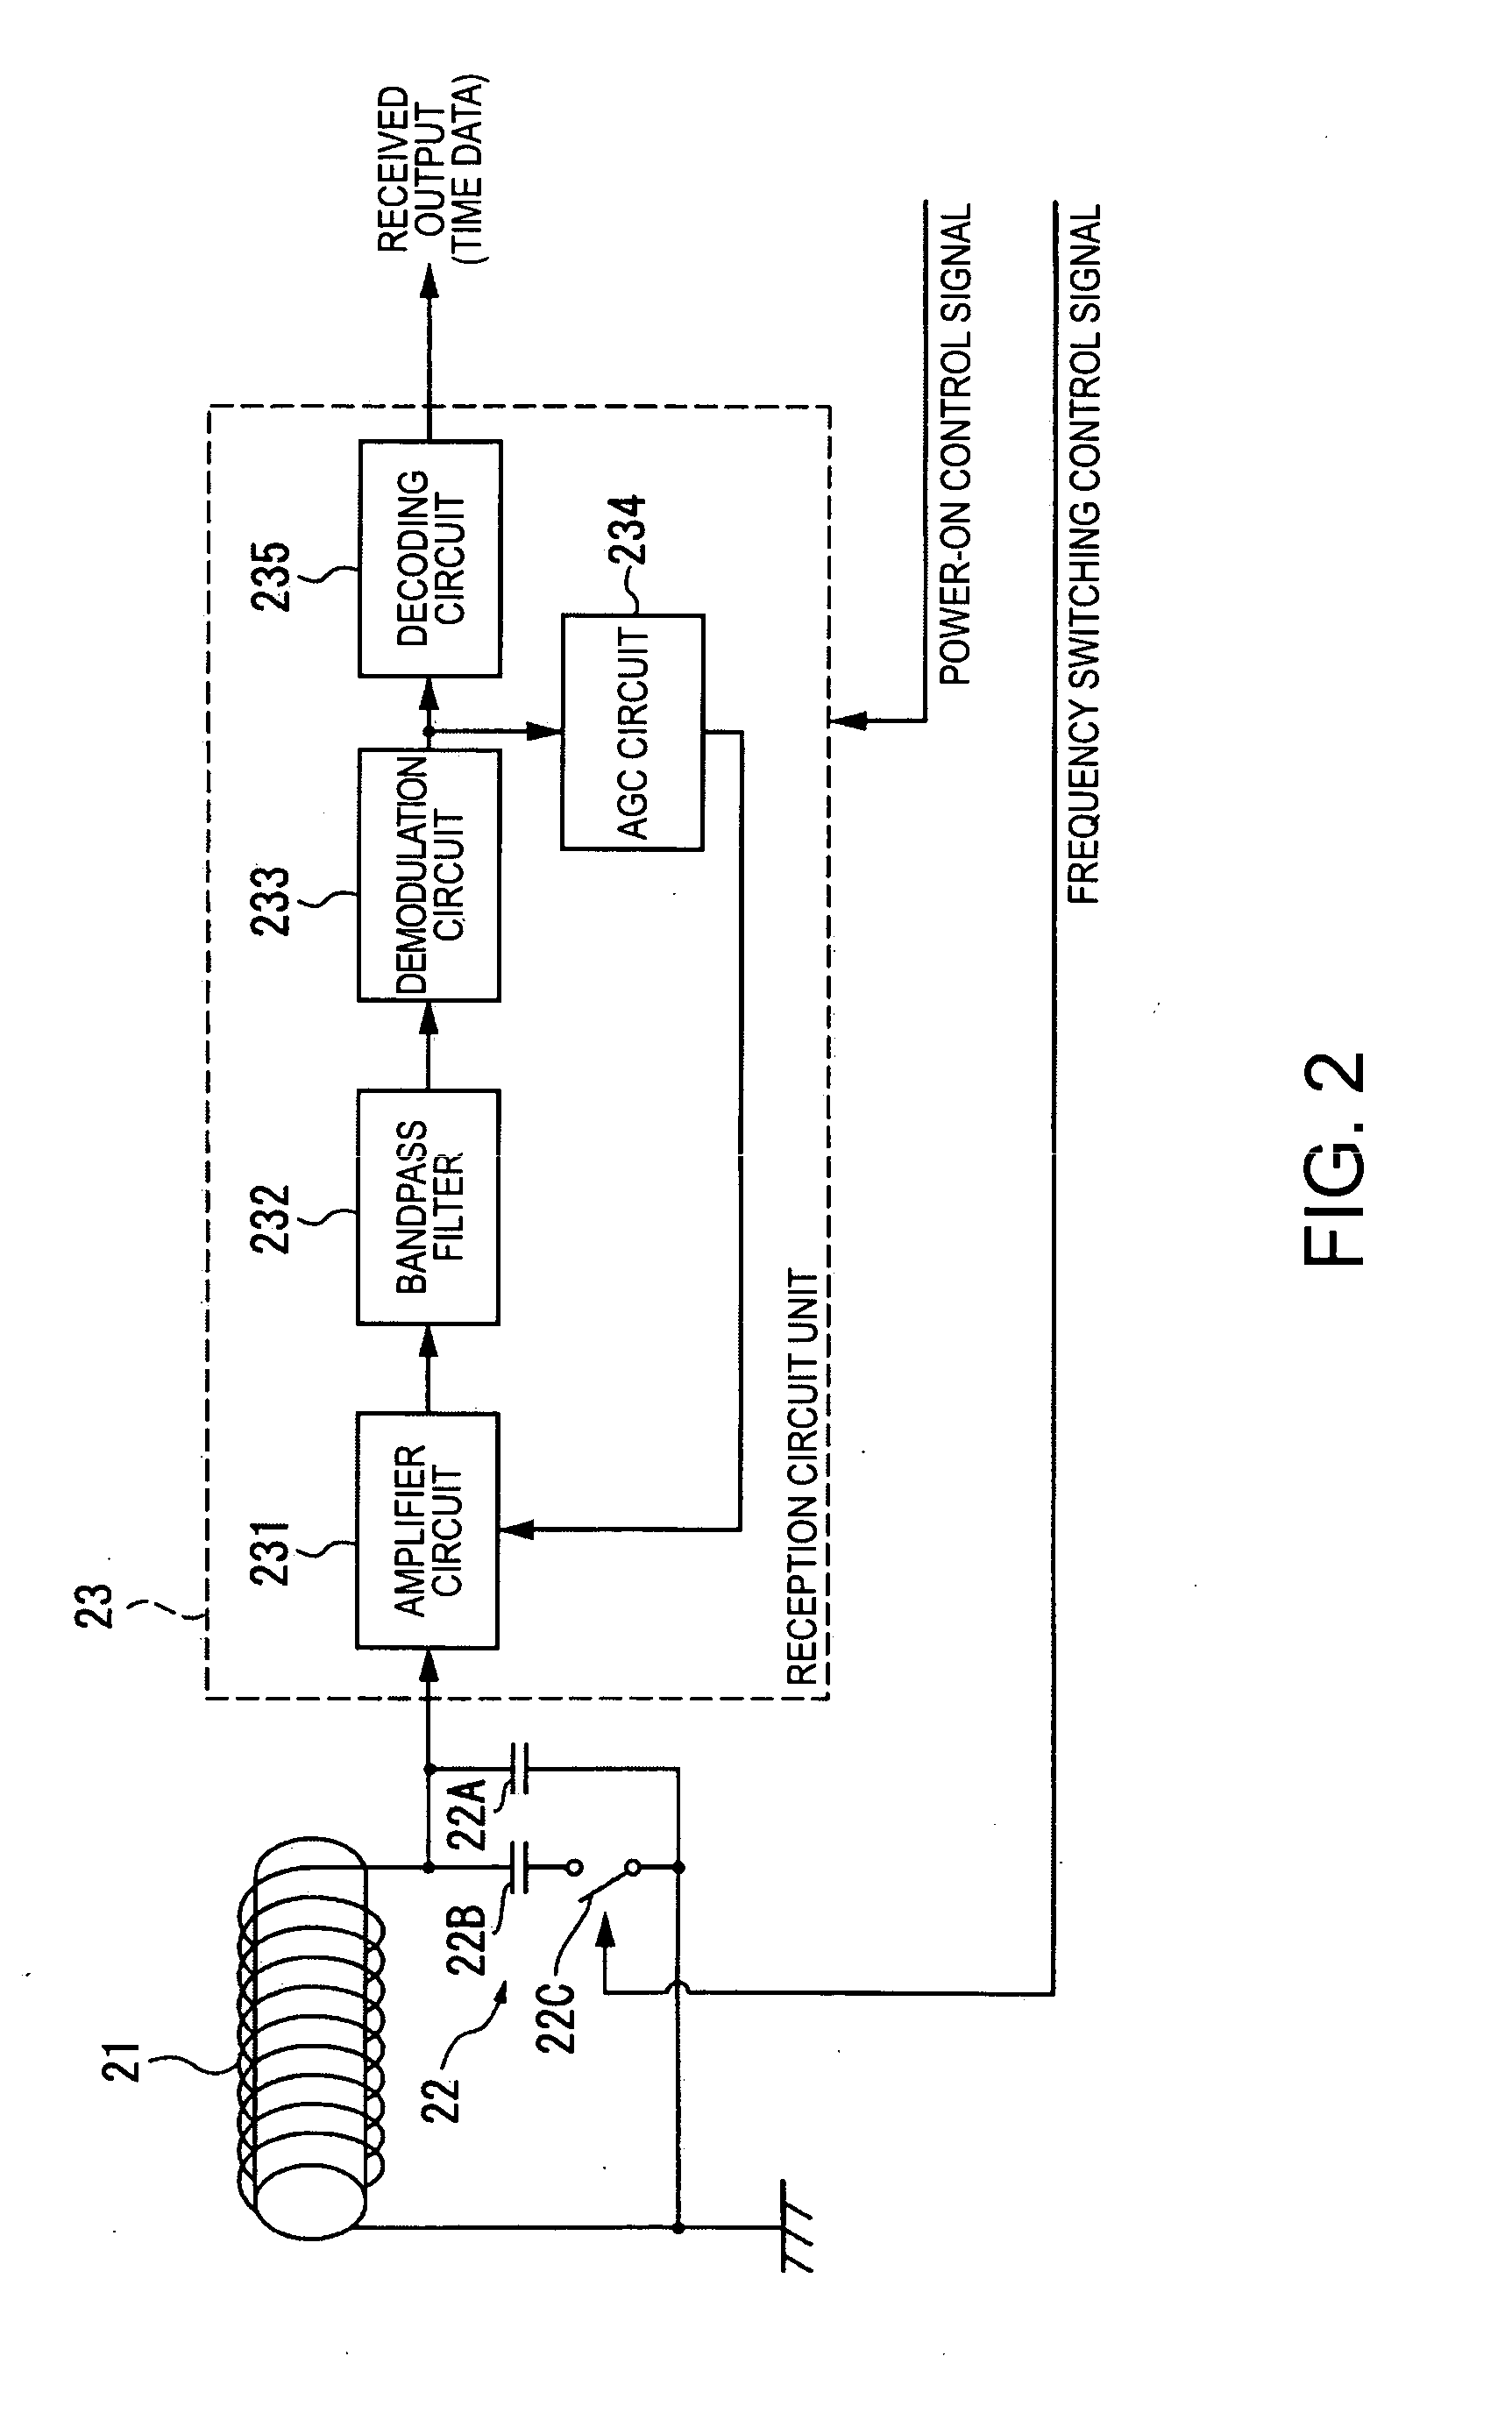 Radio-controlled timepiece and method of adjusting the time kept by a radio-controlled timepiece